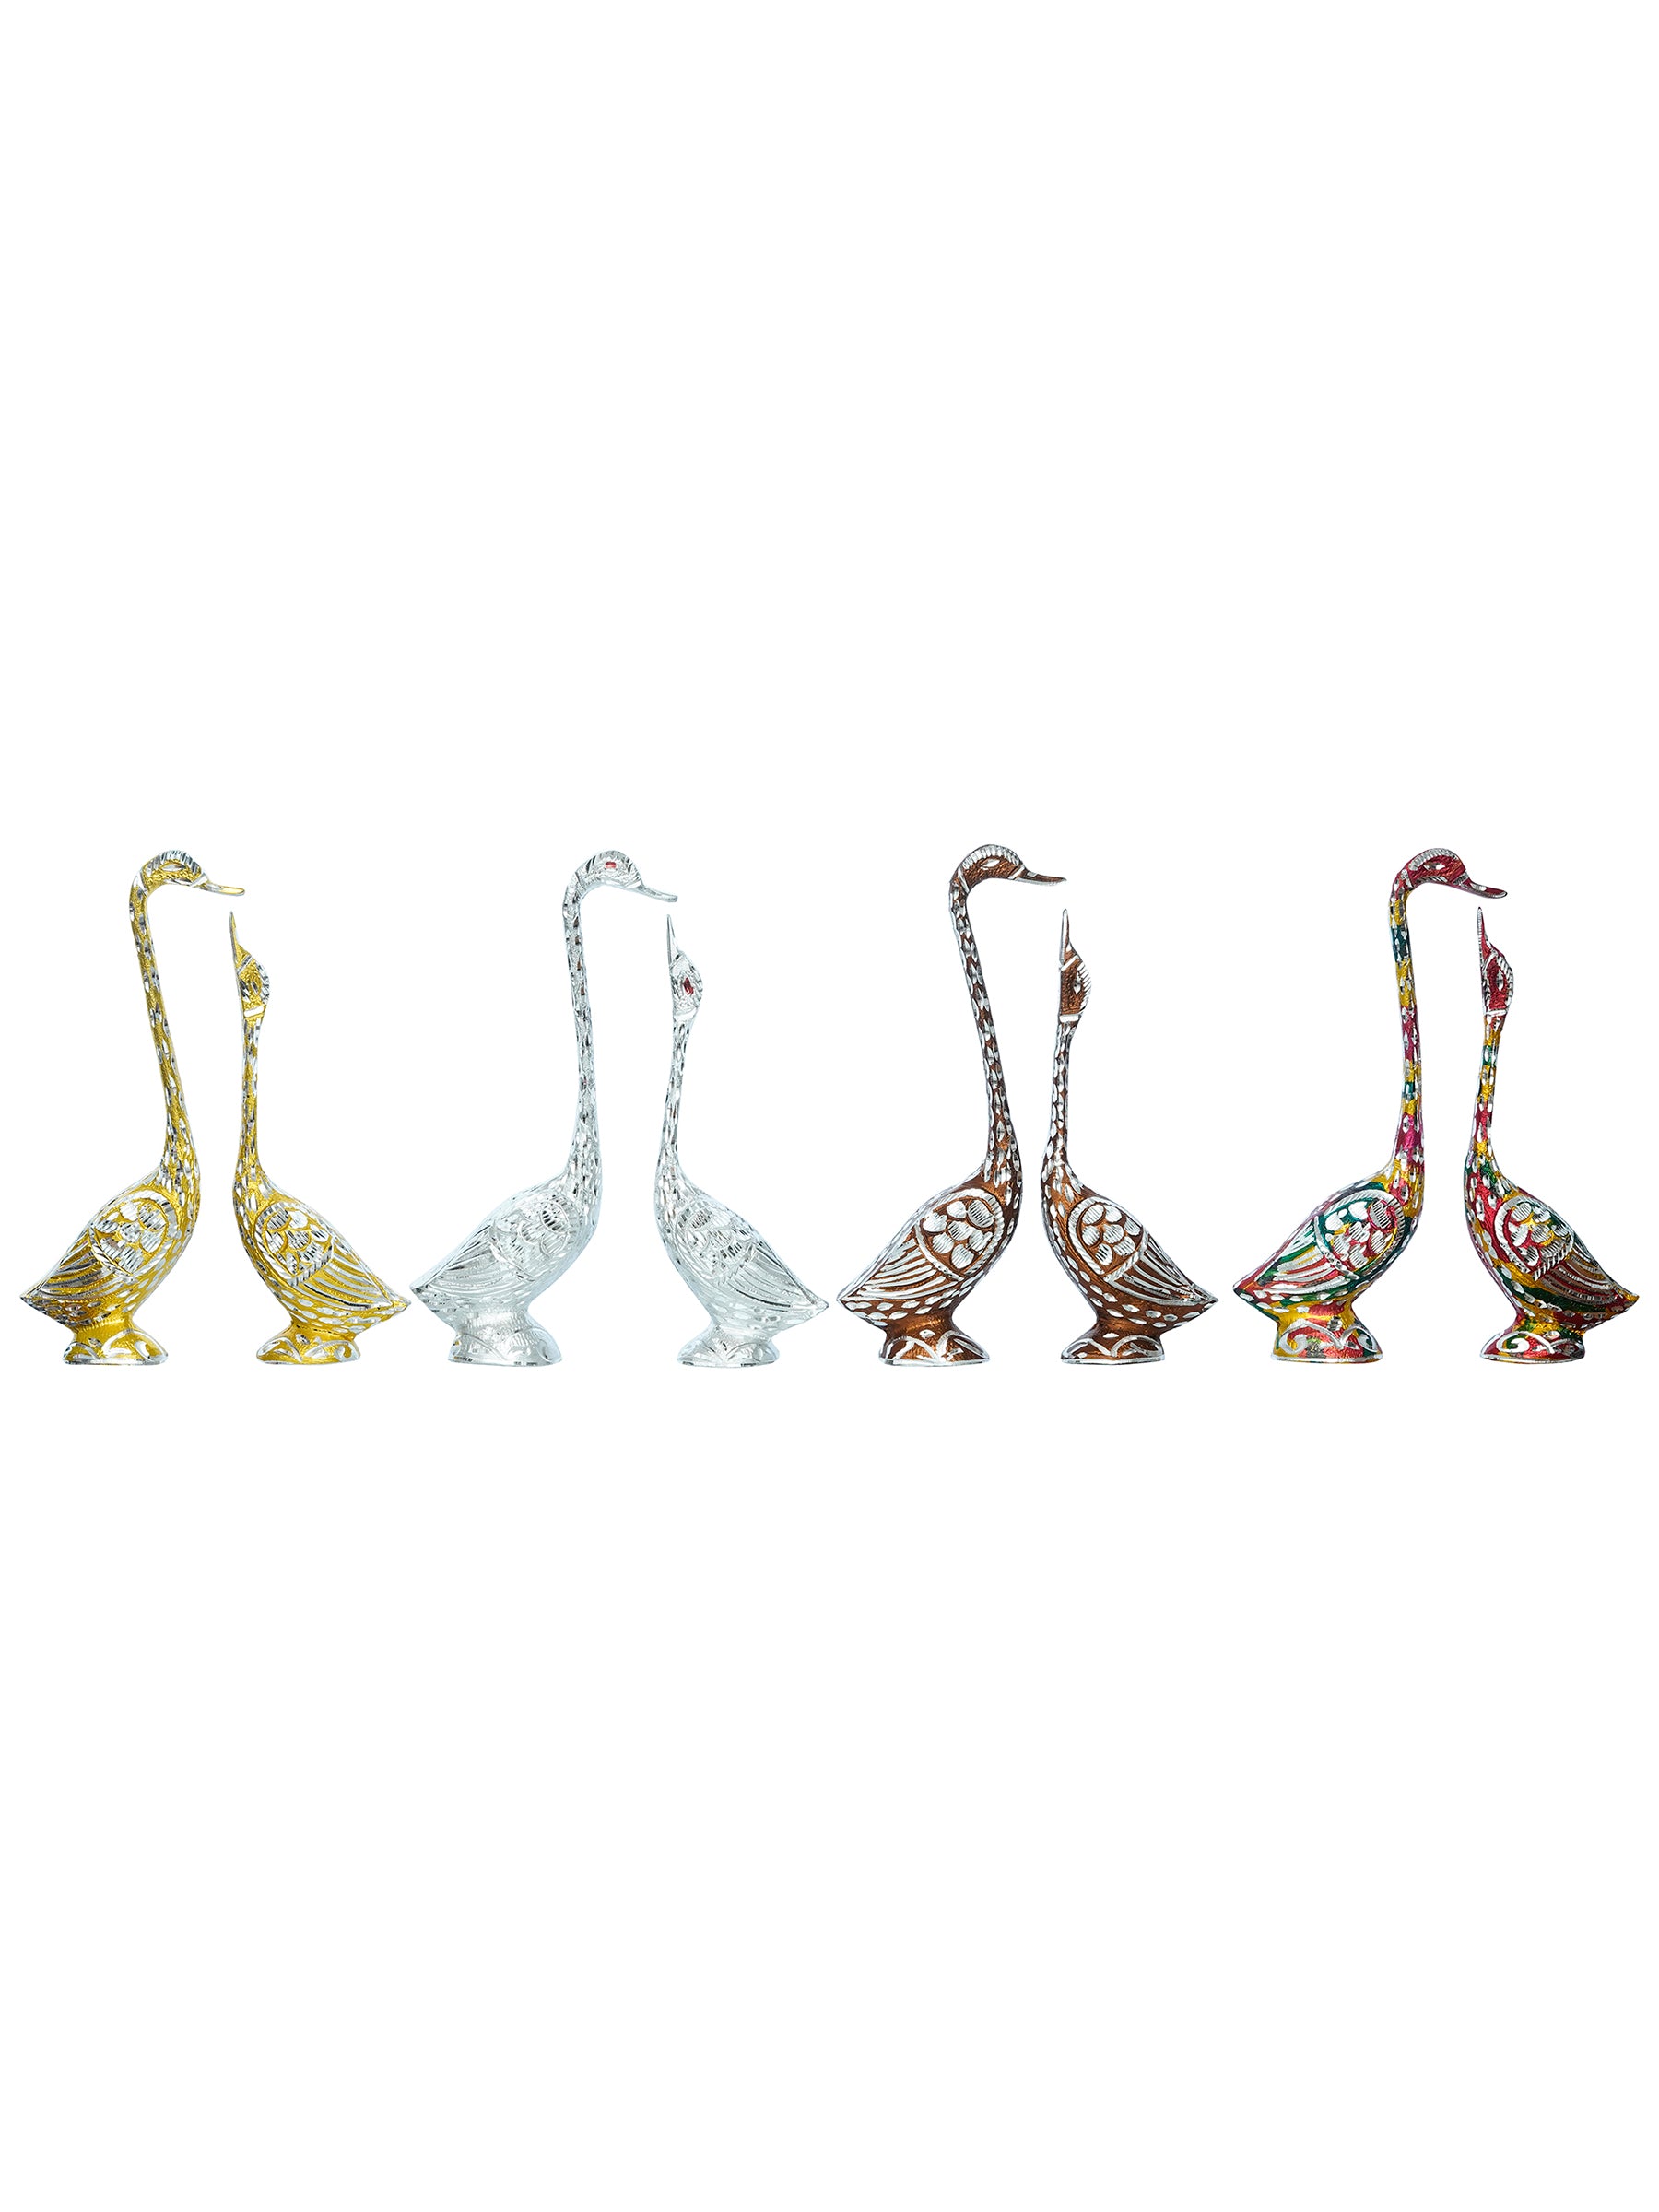 eCraftIndia Set of Four Kissing Swan Couple Handcrafted Decorative showpiece(Colorful, Golden, Silver,Brown) 4